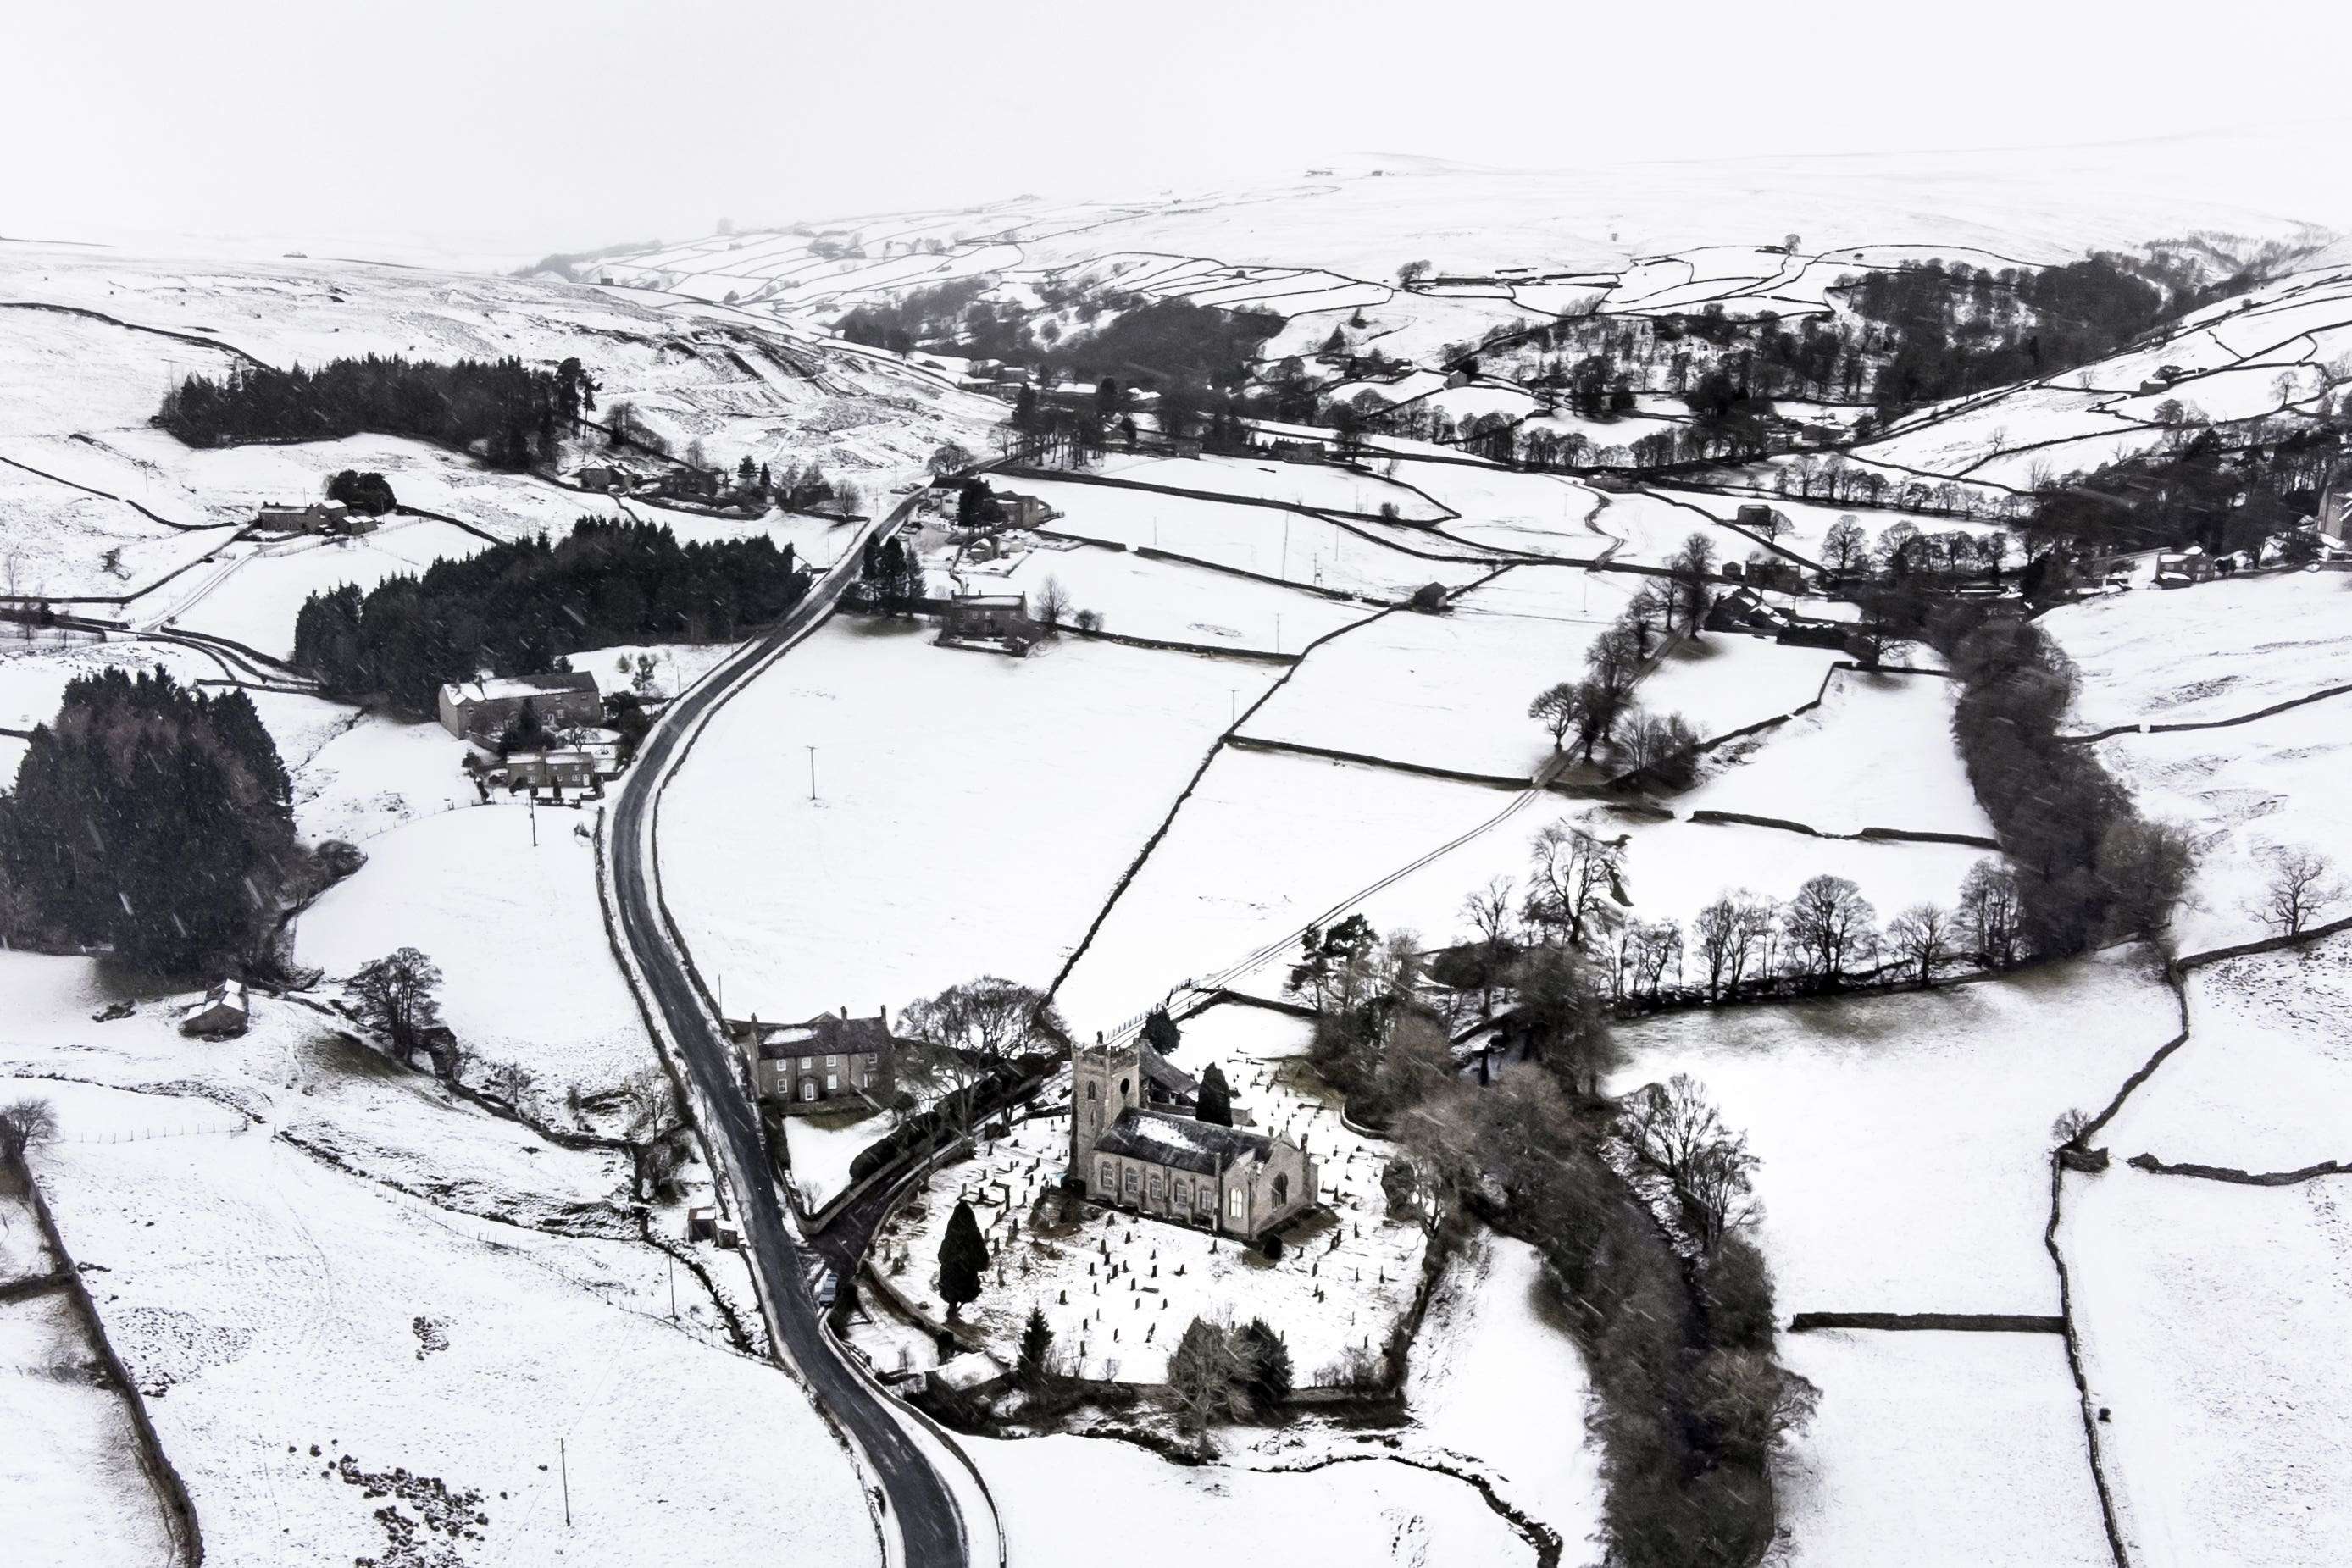 Snow and ice warnings issued for large parts of UK